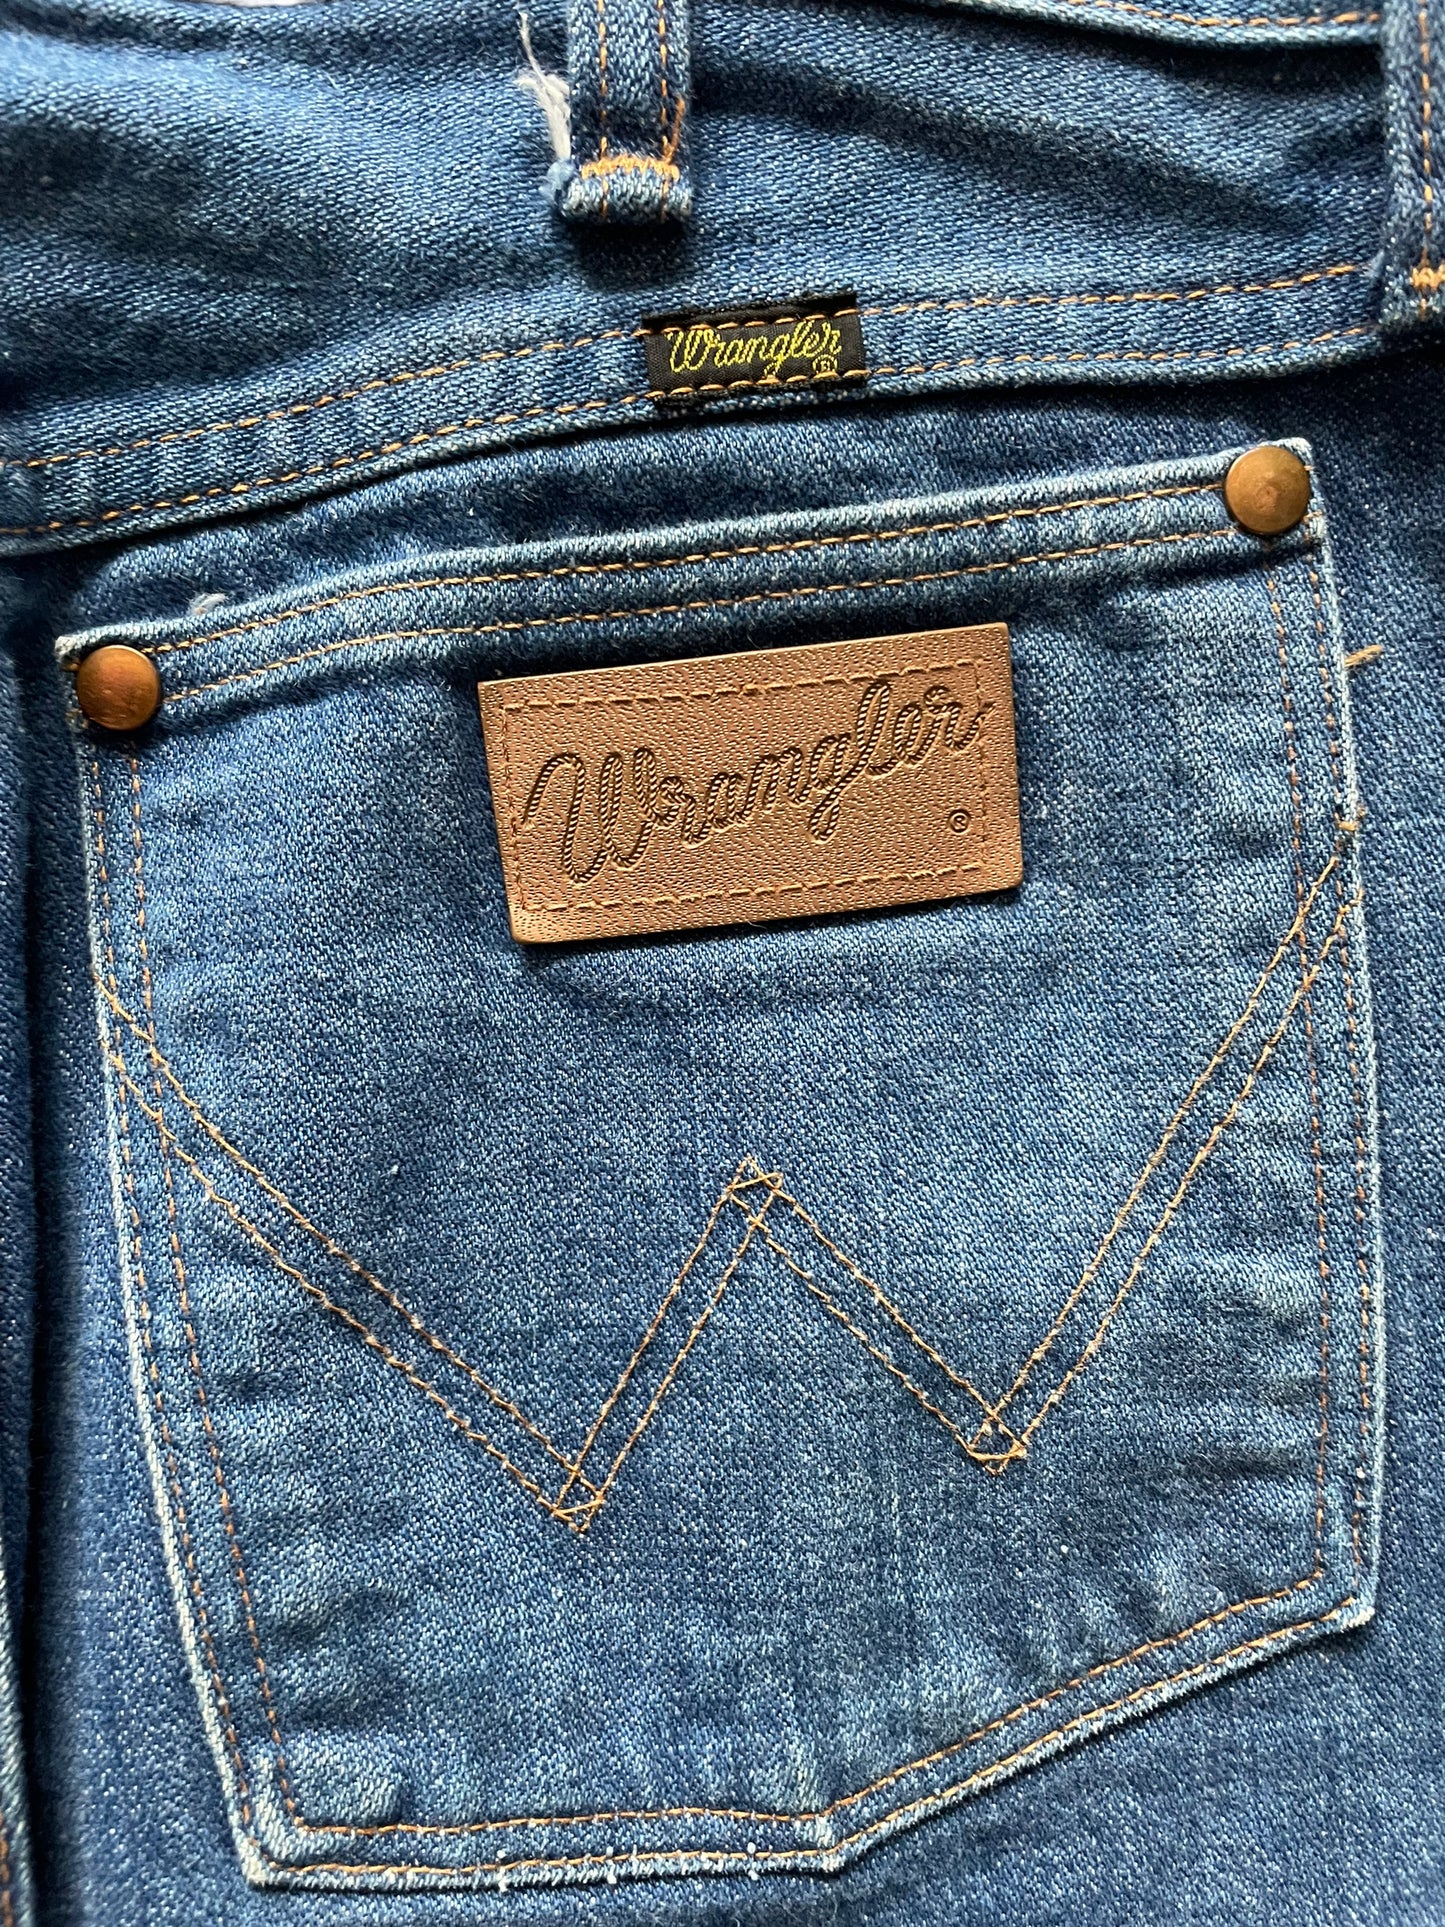 Back tag view of Vintage 1960s Era Wranglers 32x34